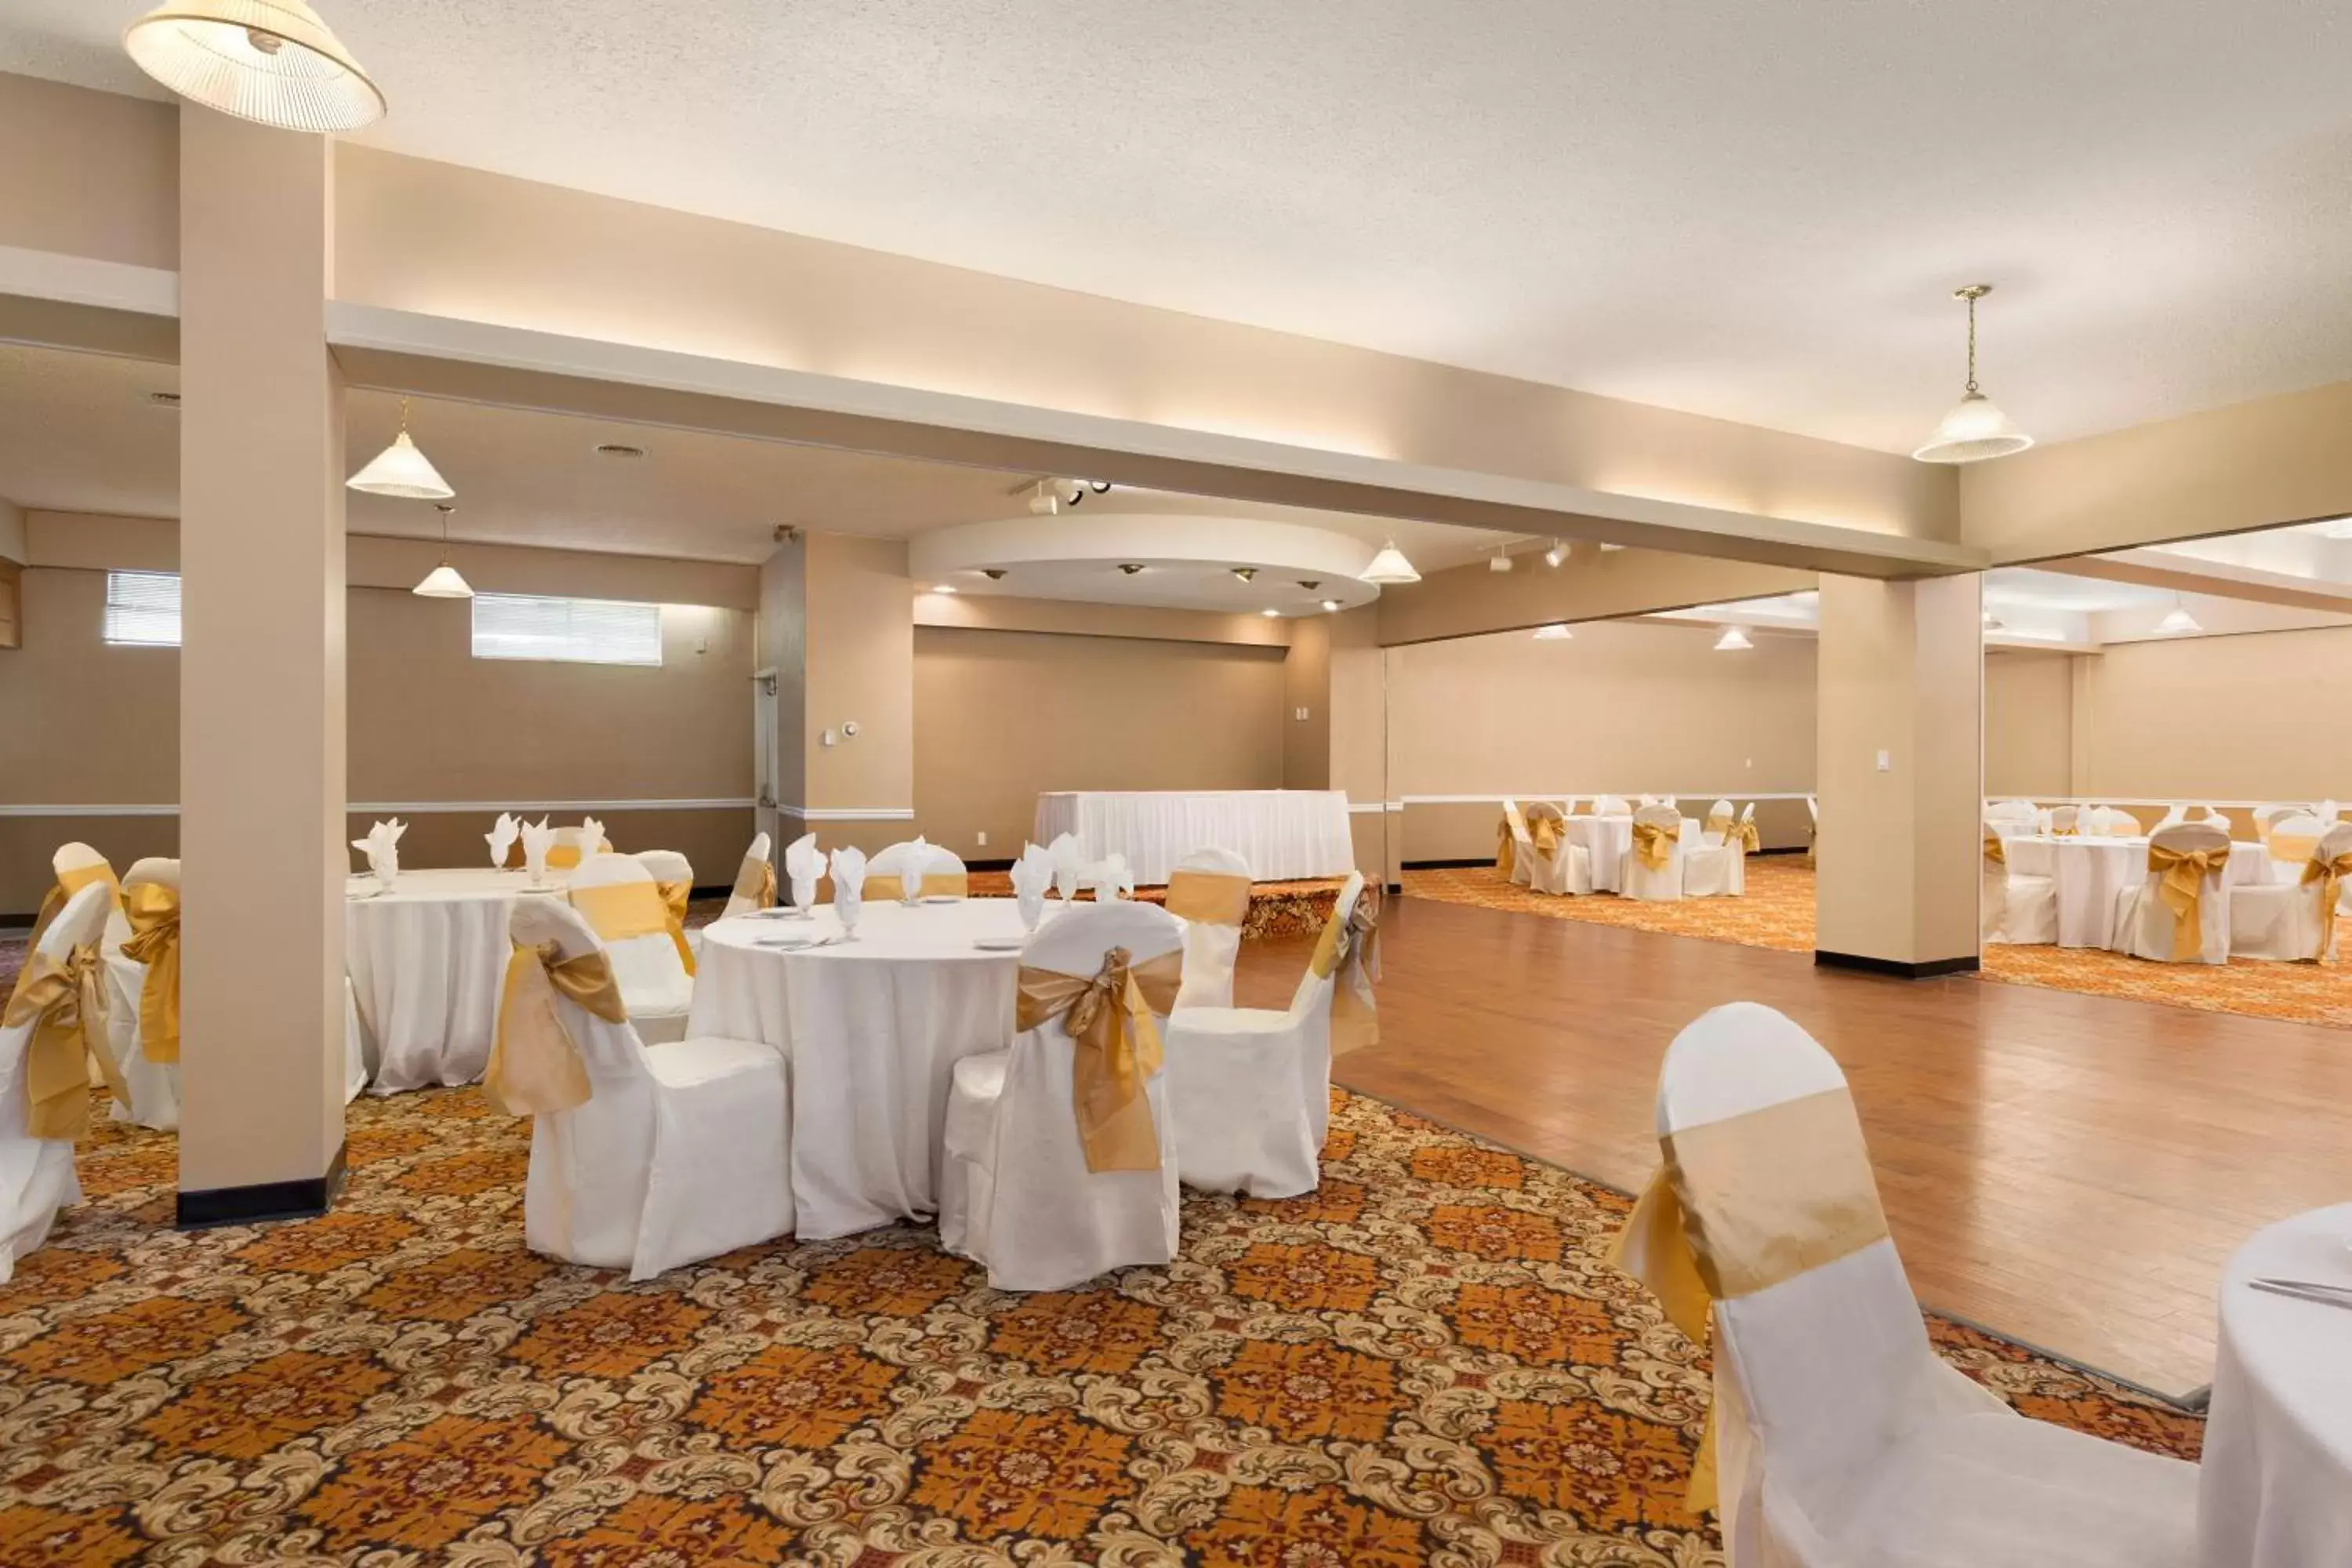 Banquet/Function facilities, Banquet Facilities in Days Inn by Wyndham Terrace